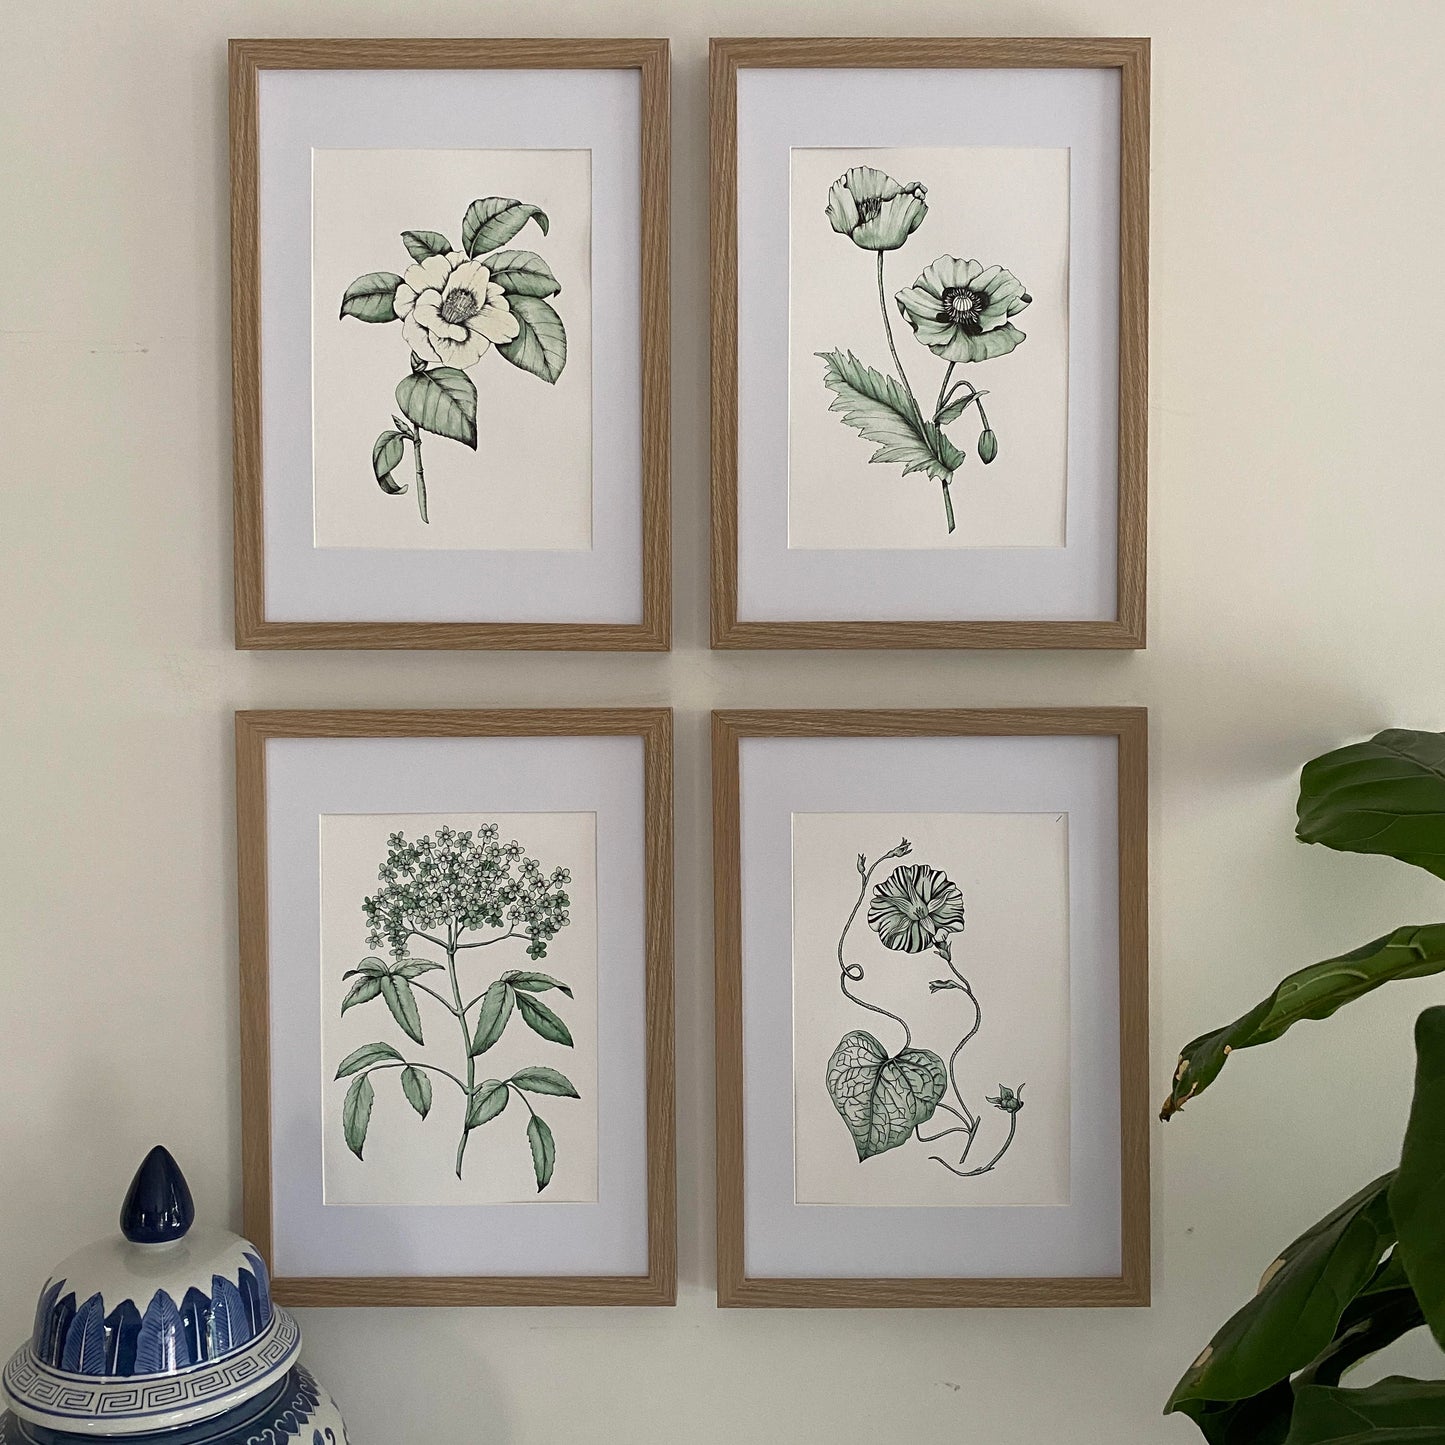 Set of 4 botanical art prints. Featuring a vintage style, these prints will add interest to any room